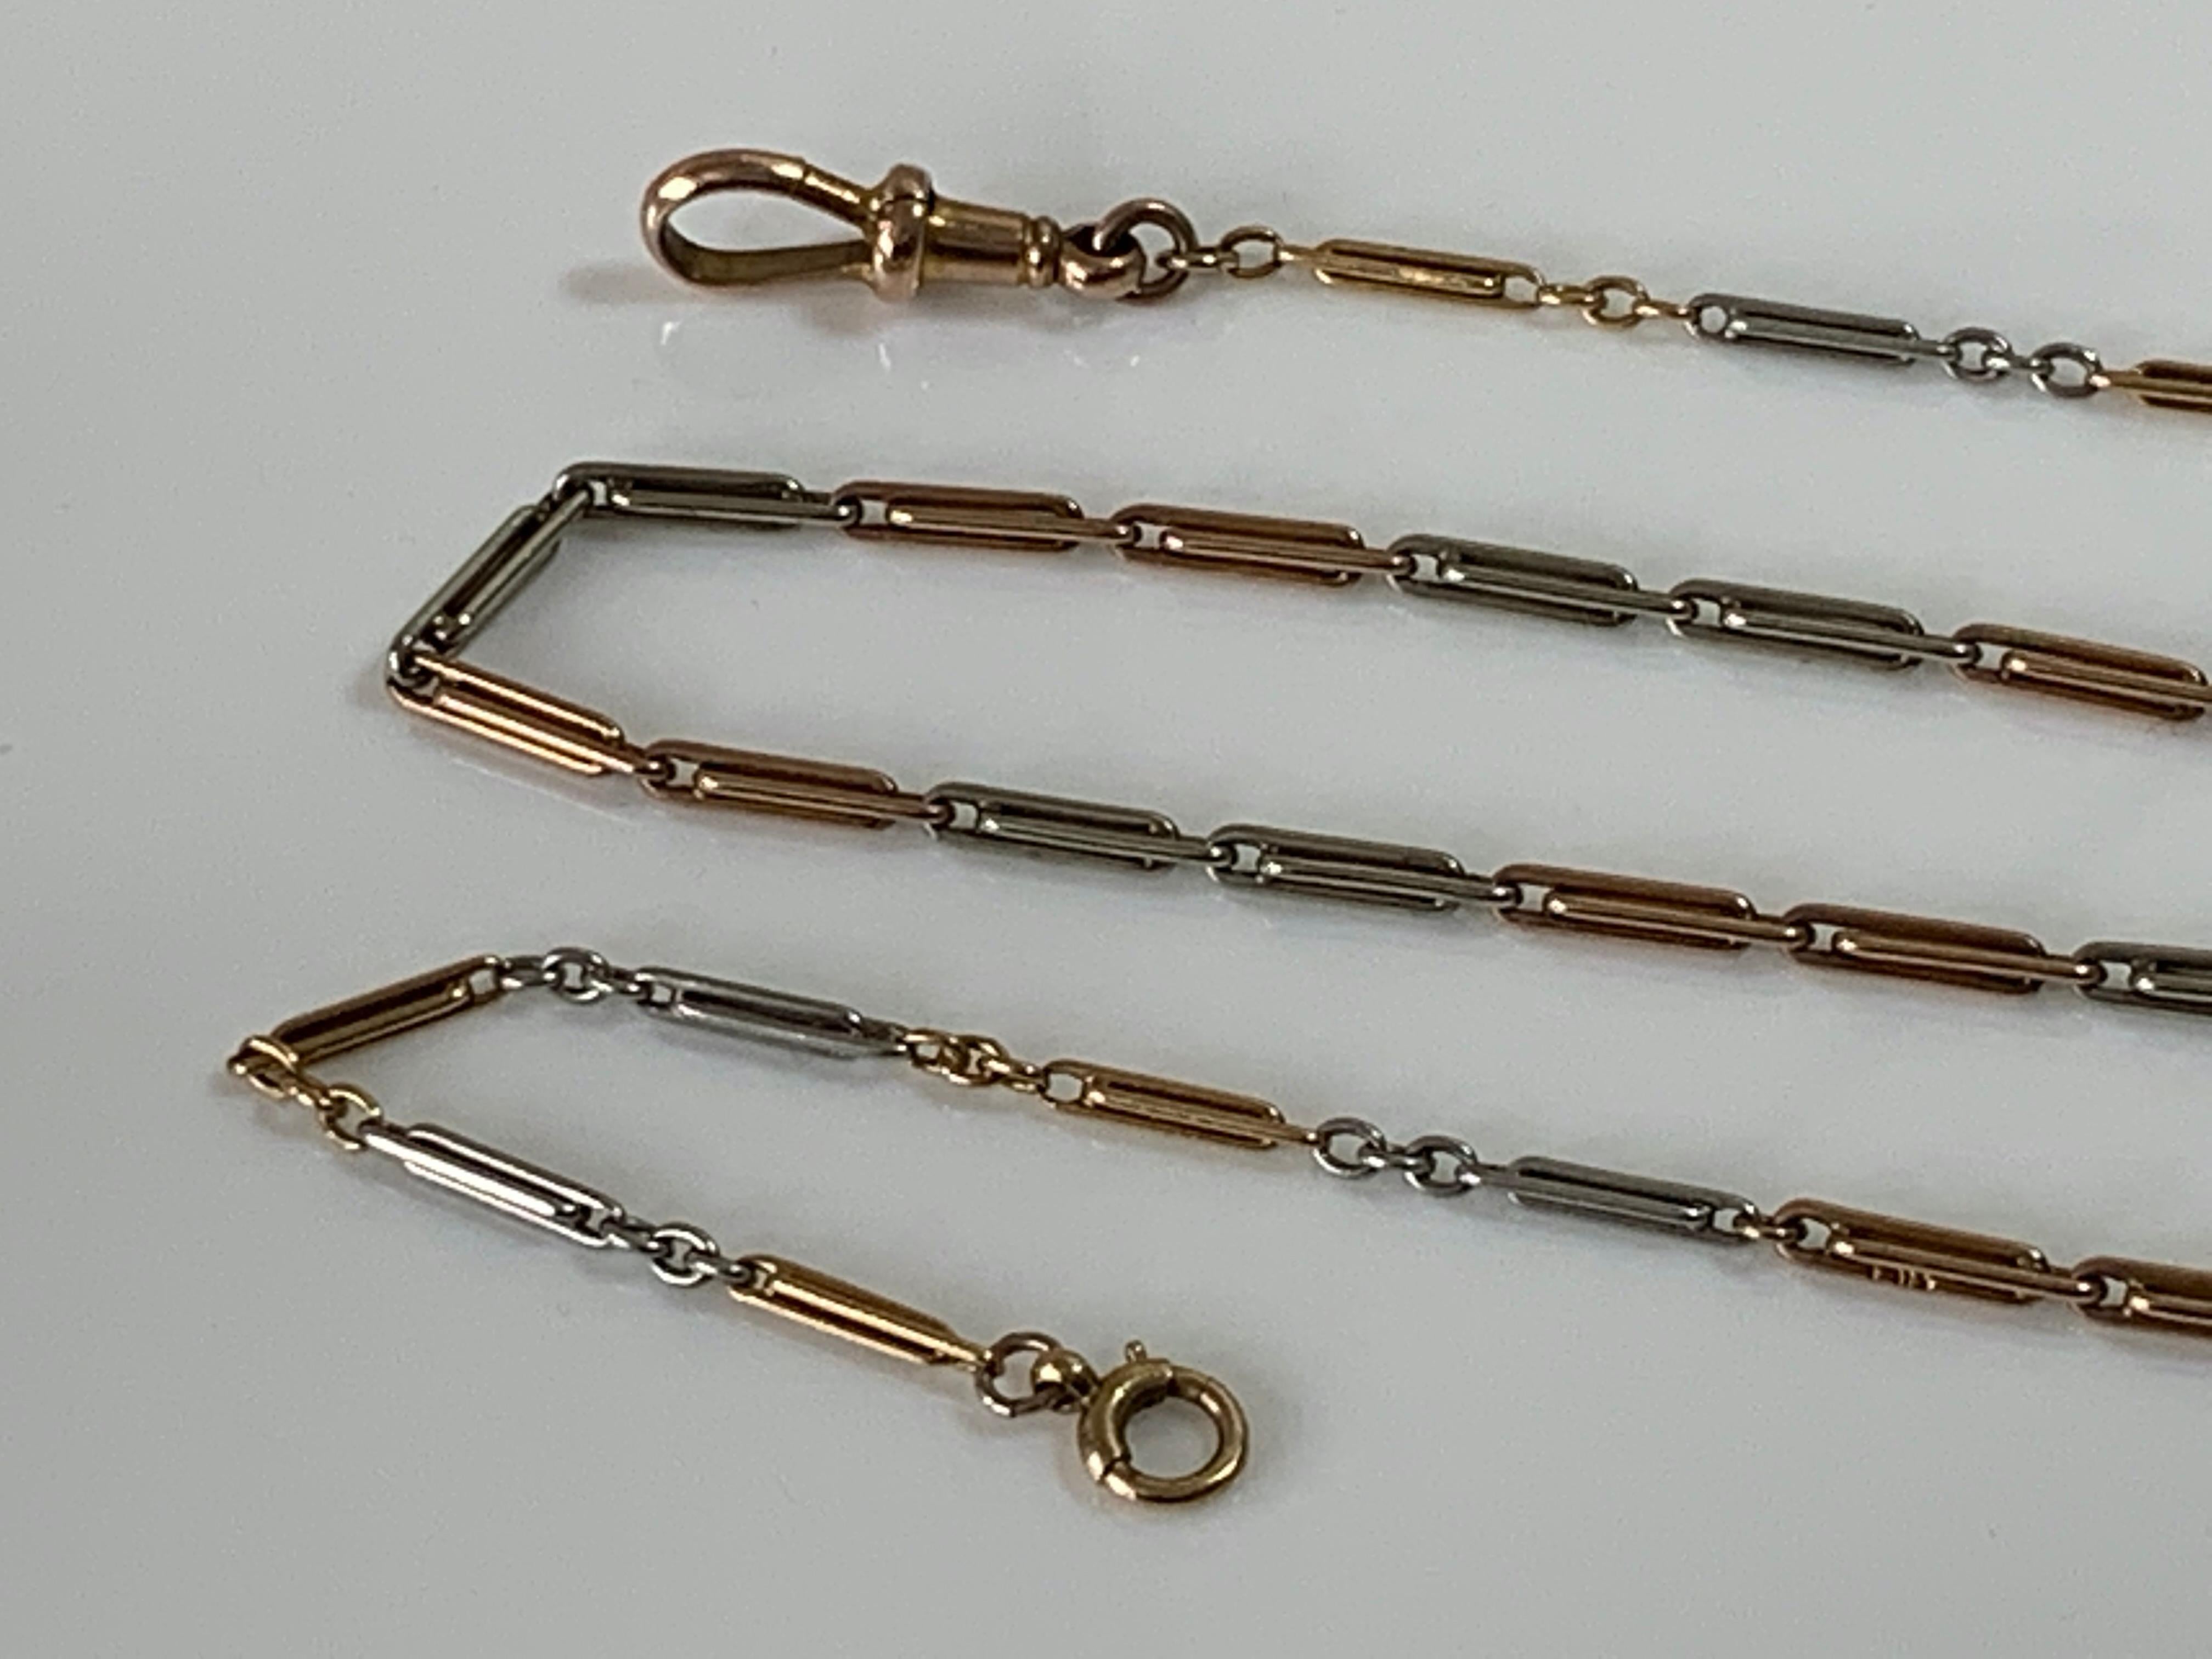 Antique Edwardian 18ct Gold & Platinum Chain 
The last three 18ct gold links on each end are yellow 18ct Gold 
all the rest are 18ct Rose Gold and Platinum
Two links are stamped with makers W.H ?
and other marks unidentifiable - please see